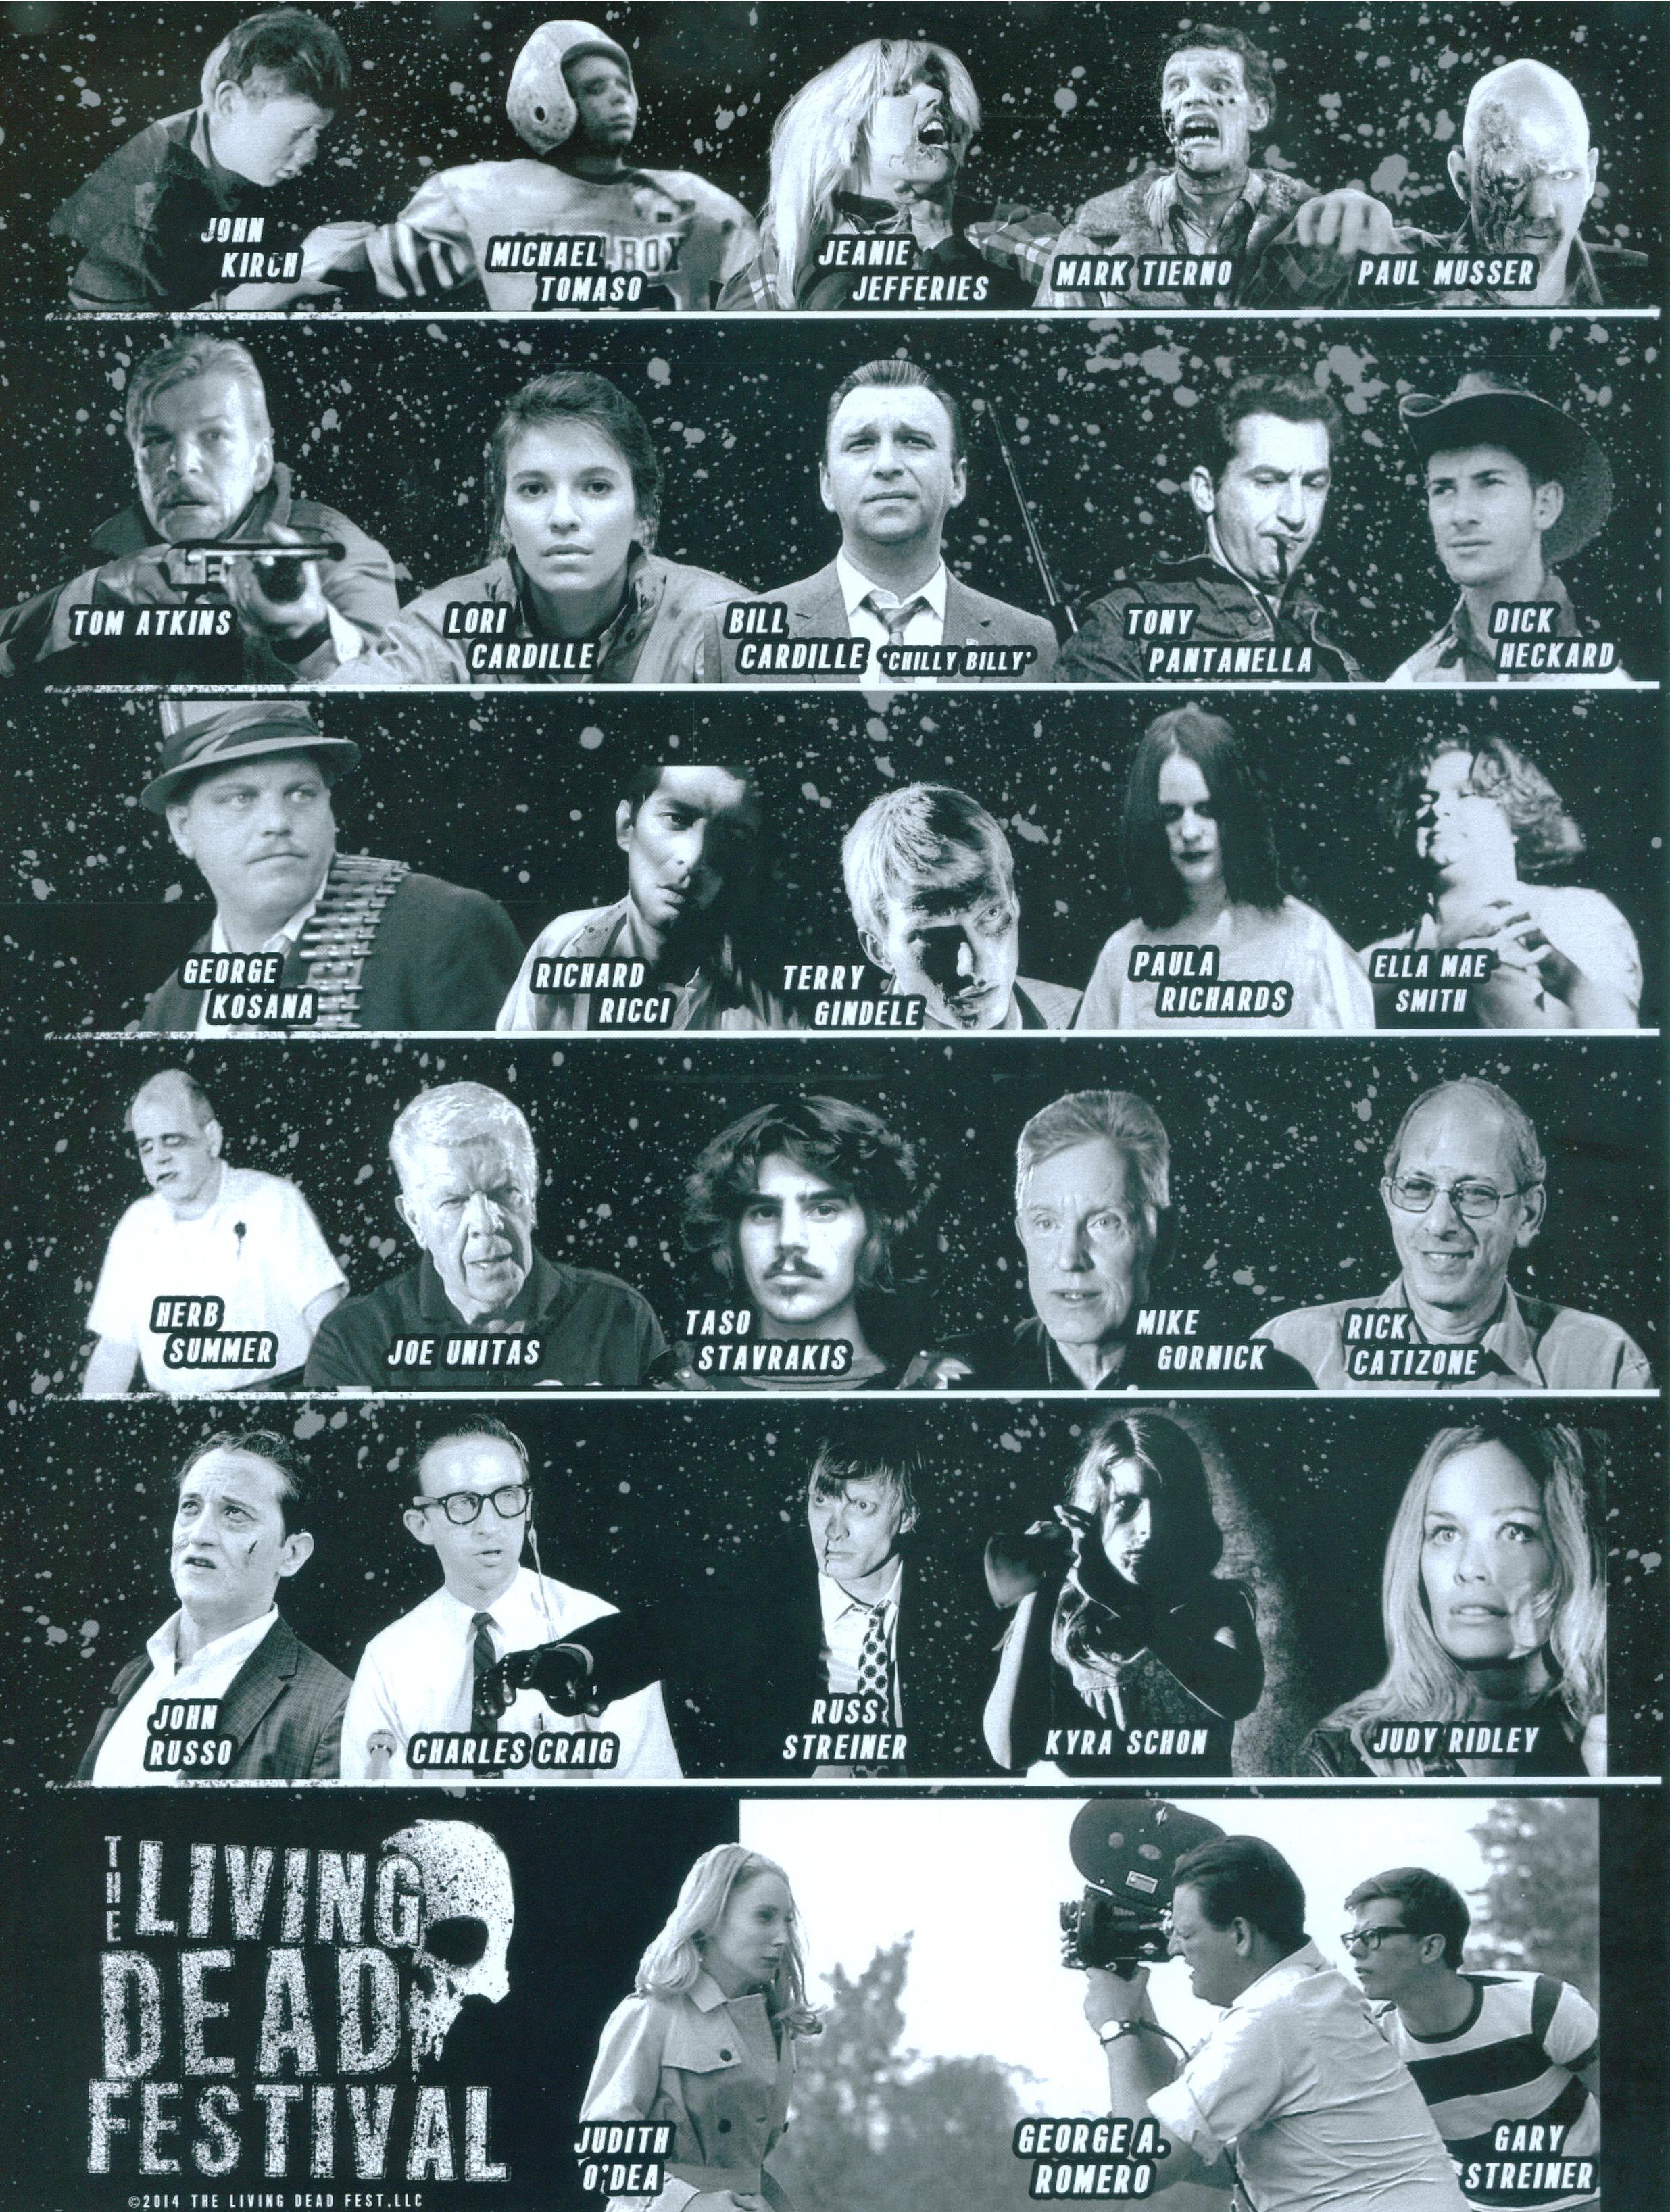 Media Guest Lineup for The Living Dead Fest, 2014.